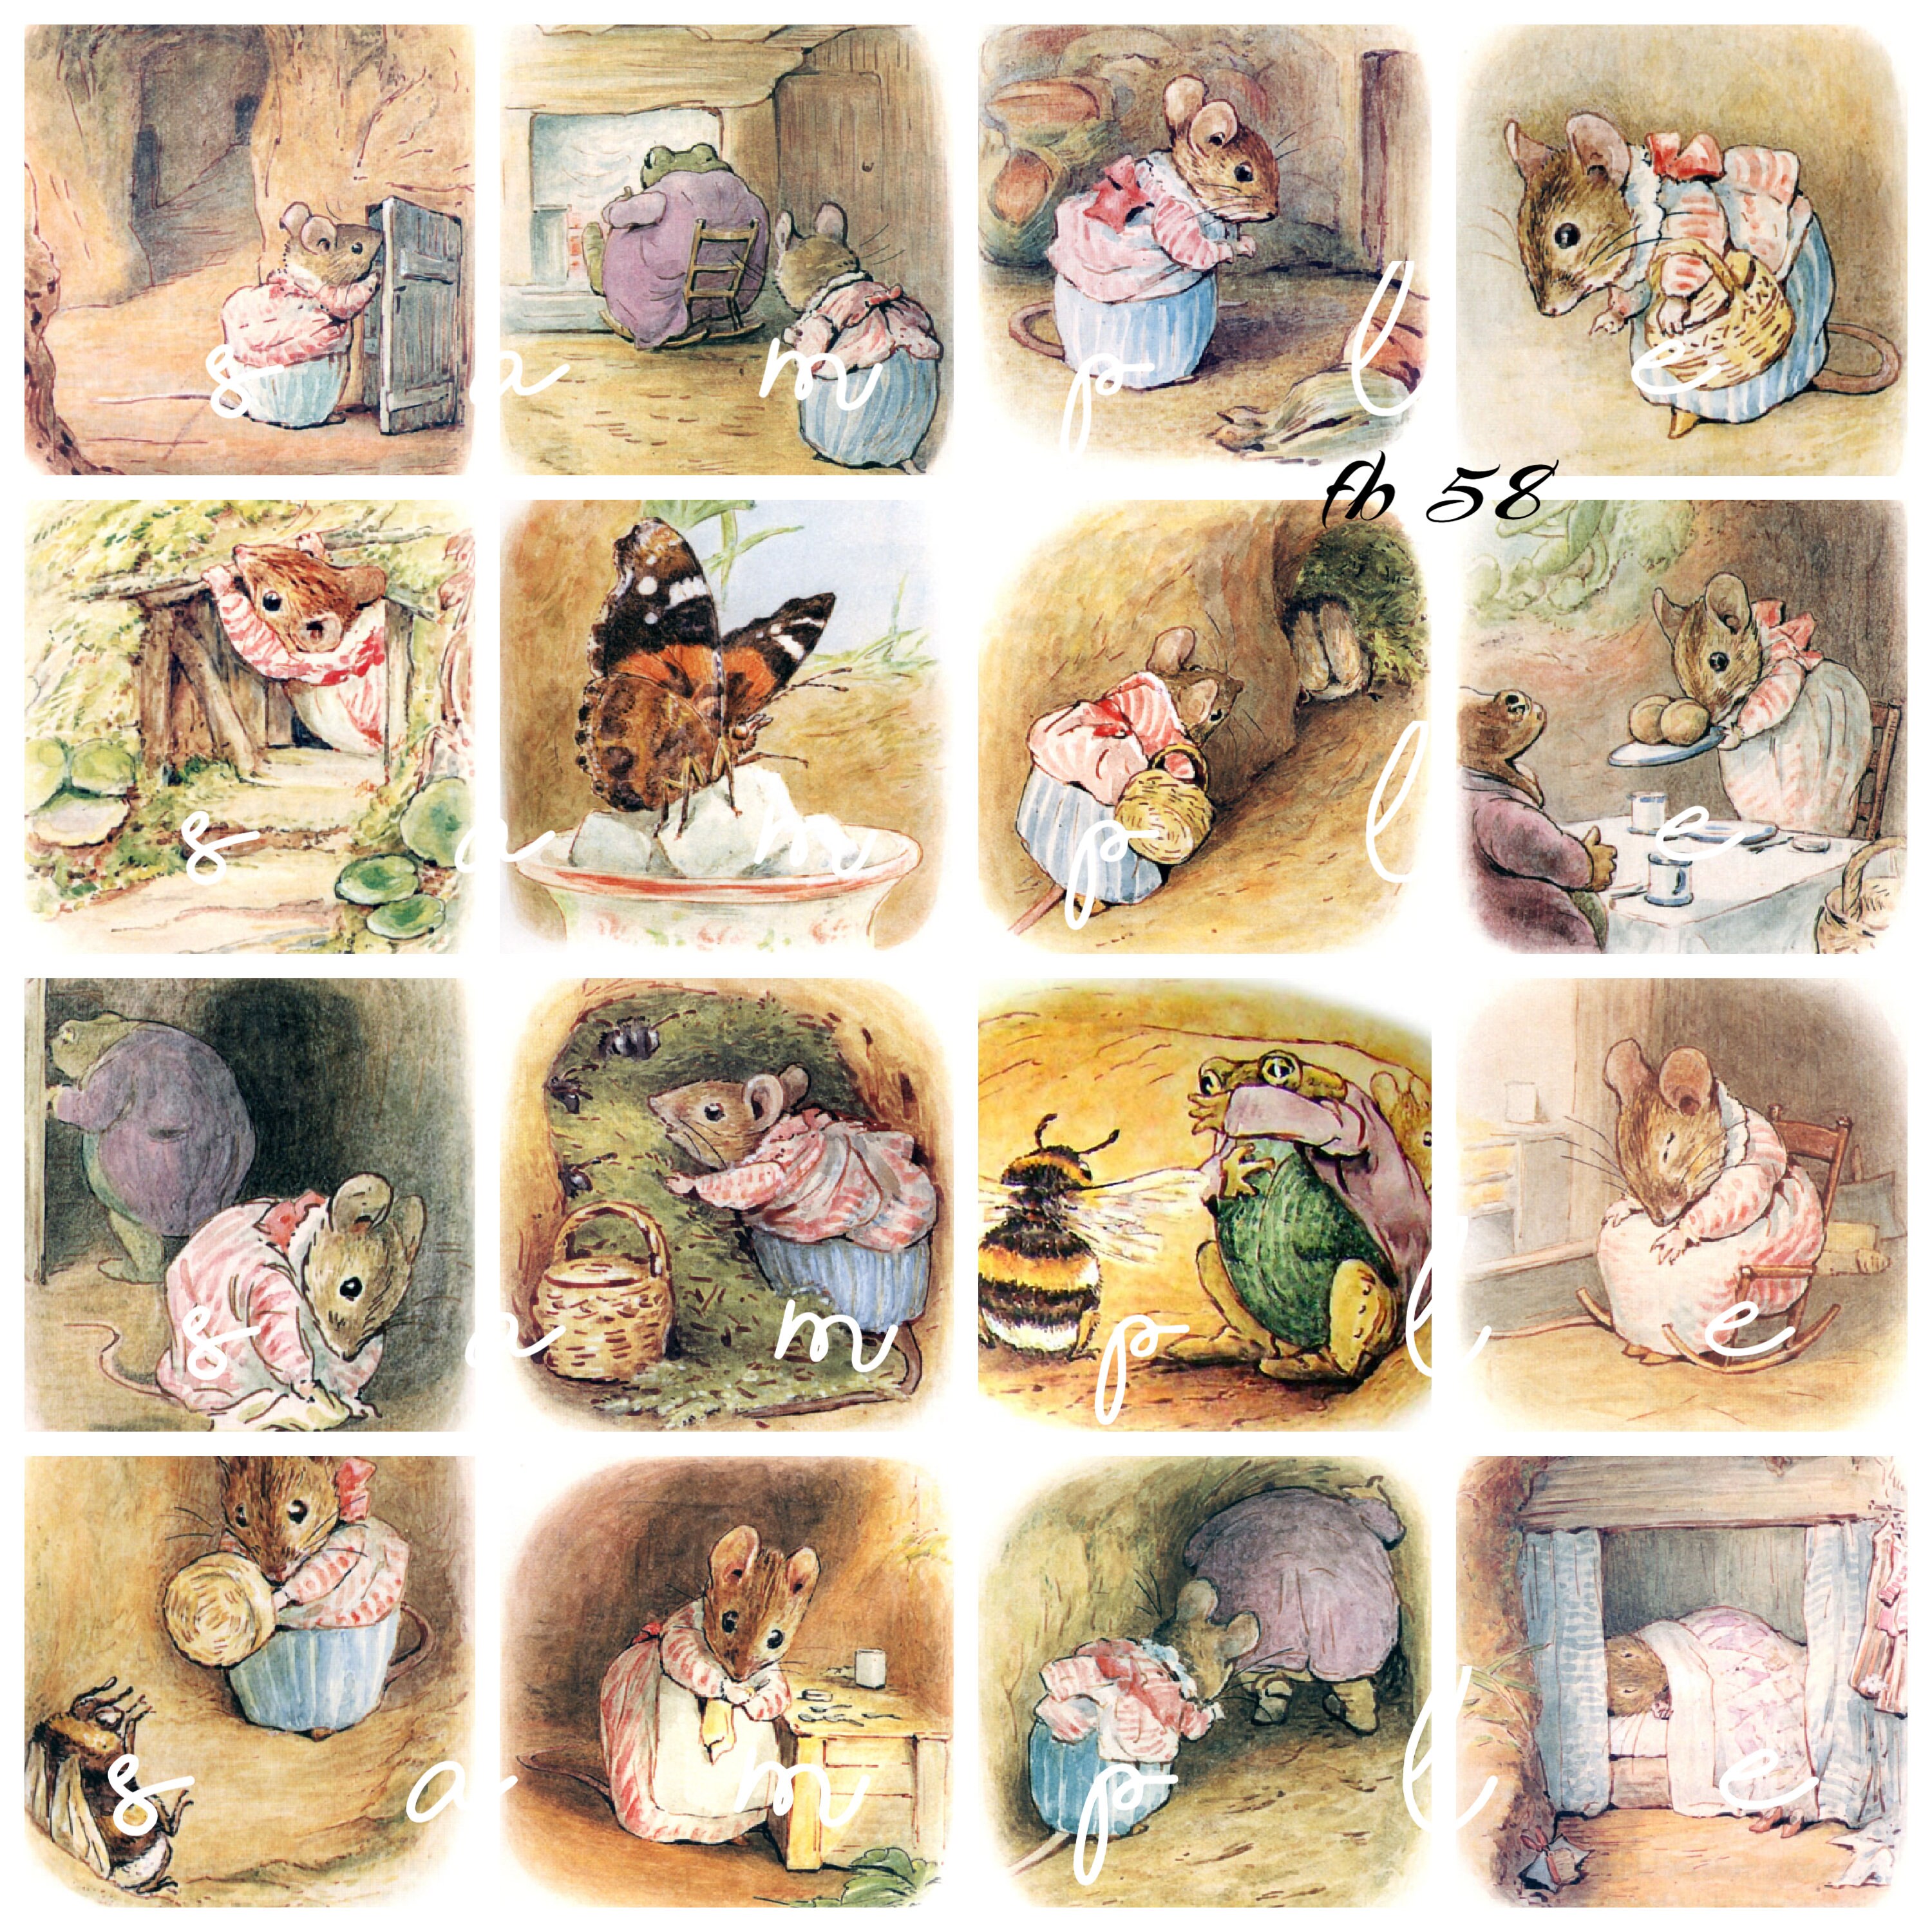 Vintage Beatrix Potter Peter Rabbit the Tale of Mrs TITTLE Mouse 16 2 1/4 X  2 1/4images Printed on 1 8 1/2 X 11 Fabric Block Fb 58 